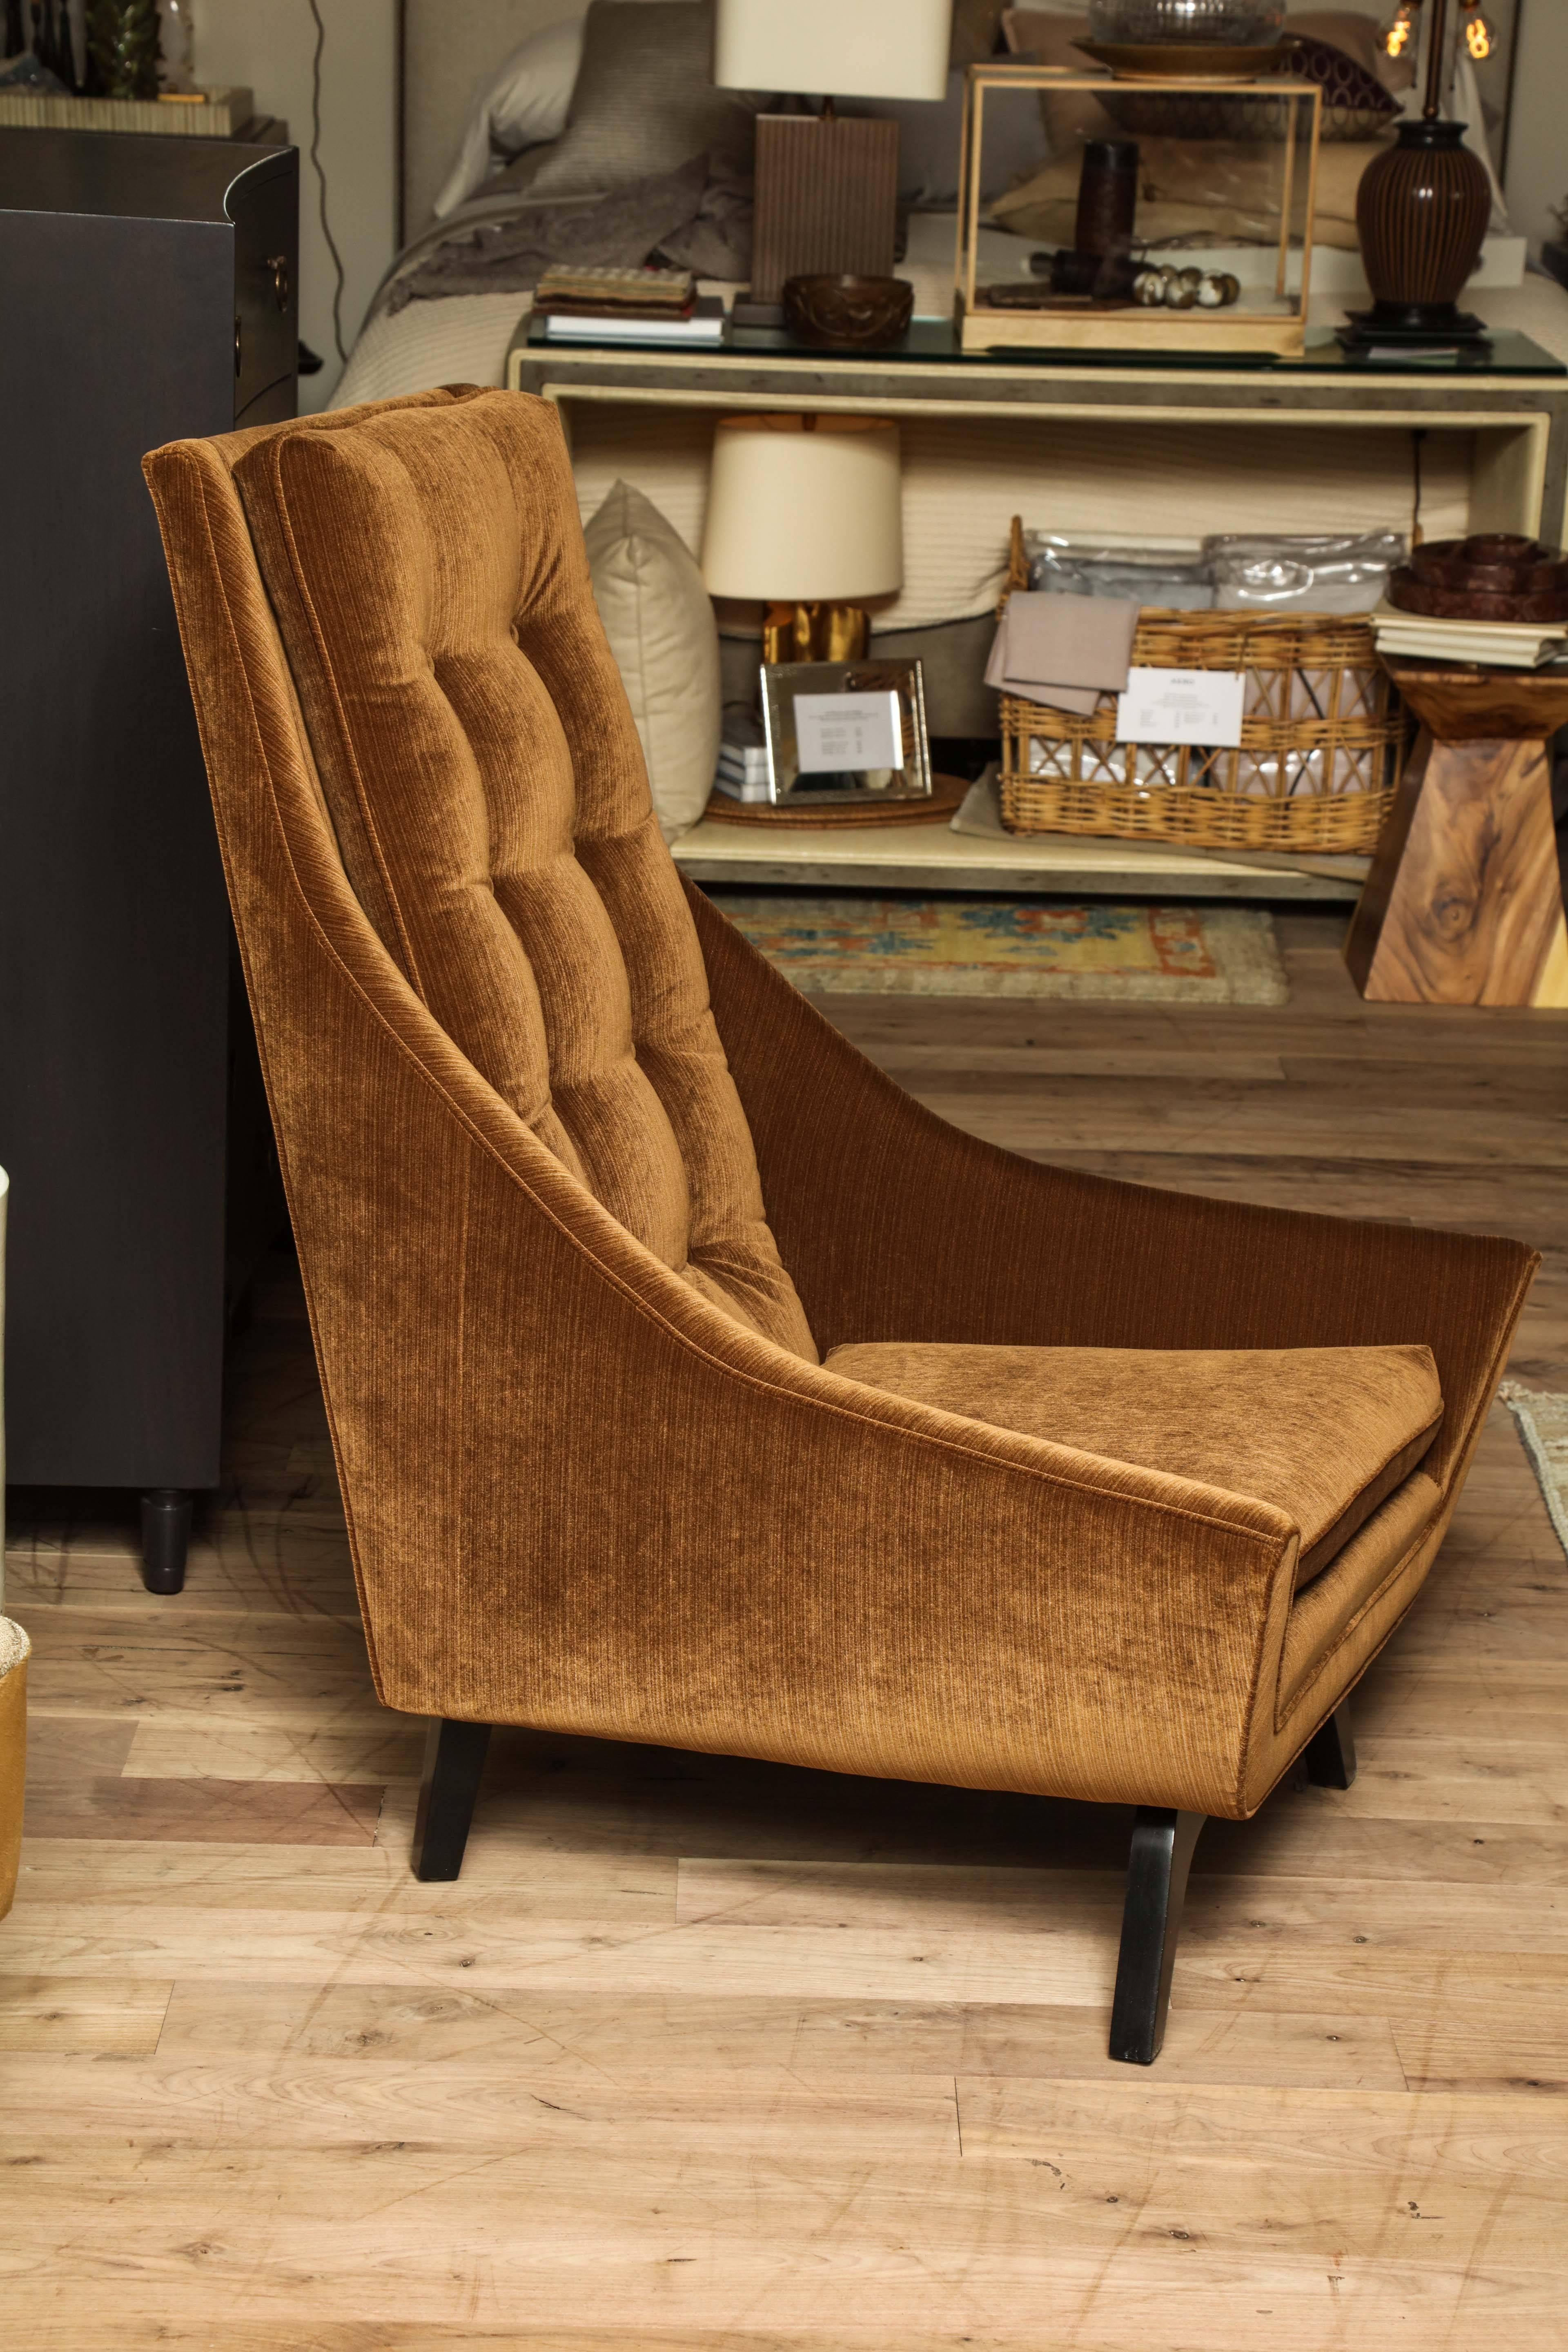 High back tufted lounge chair by Adrian Pearsall for Craft Associates circa 1960 upholstered in chestnut strie velvet.
 